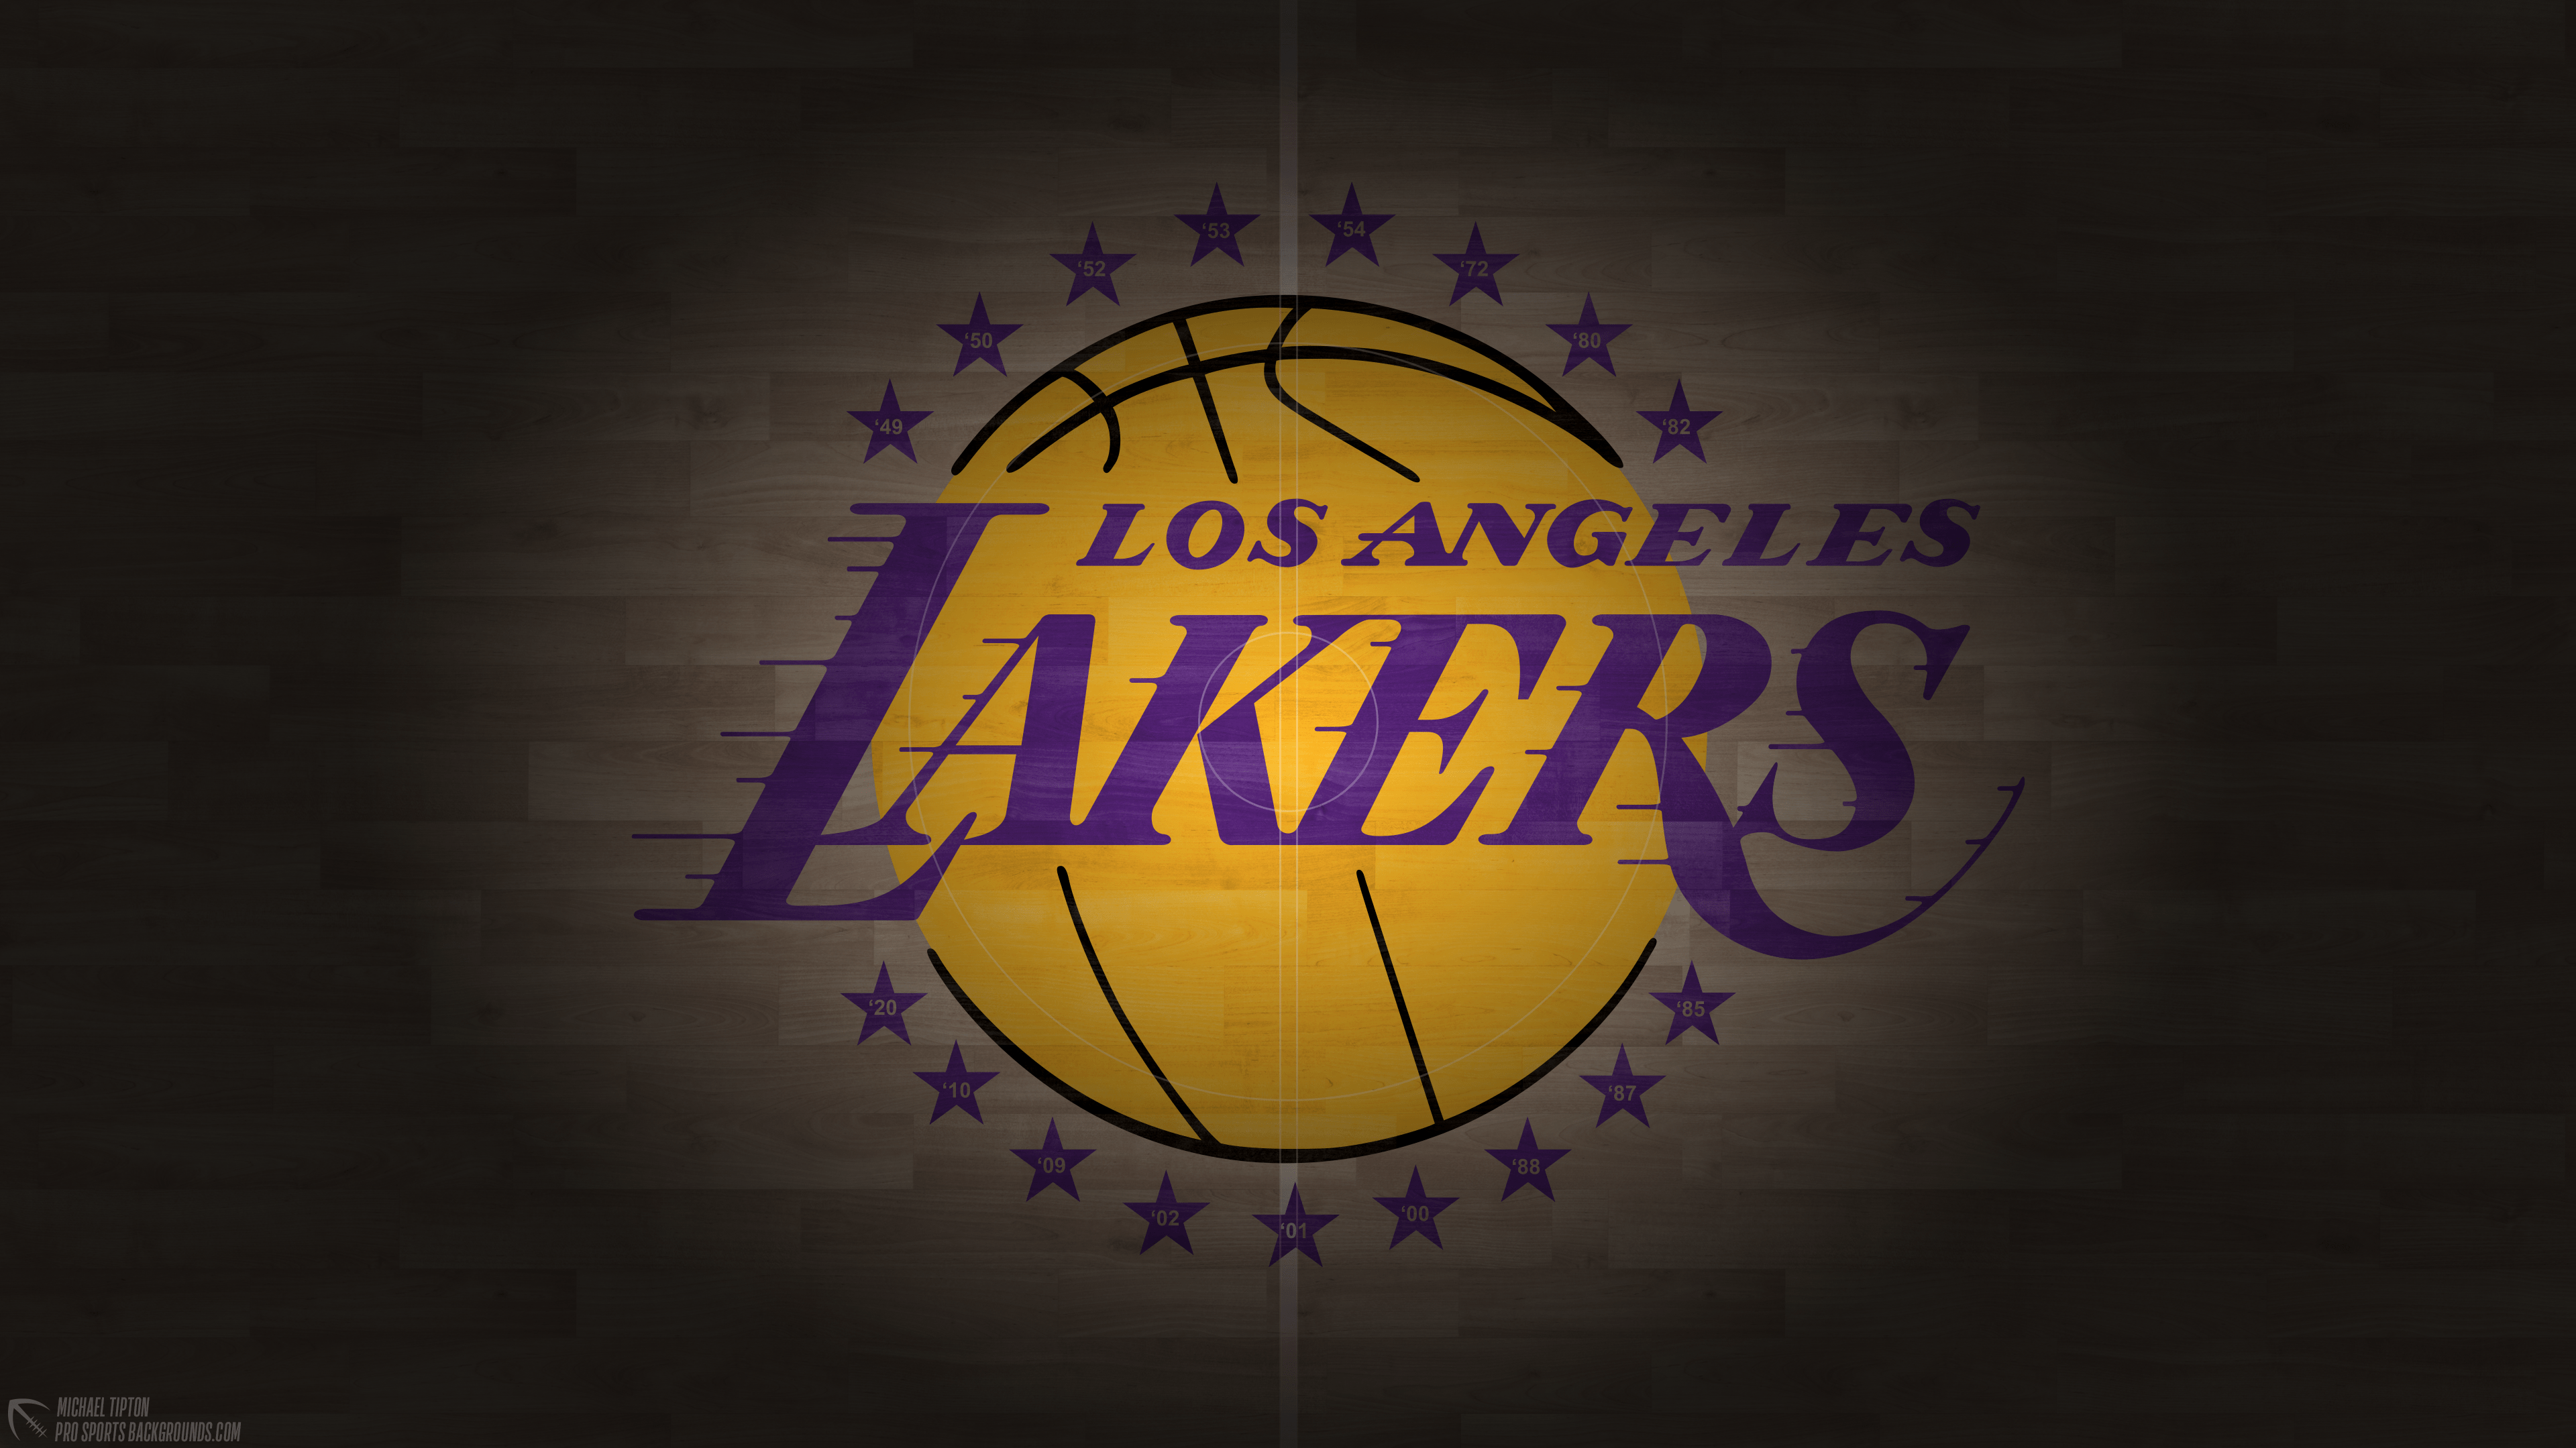 Los Angeles Lakers Wallpaper Pro Sports Background